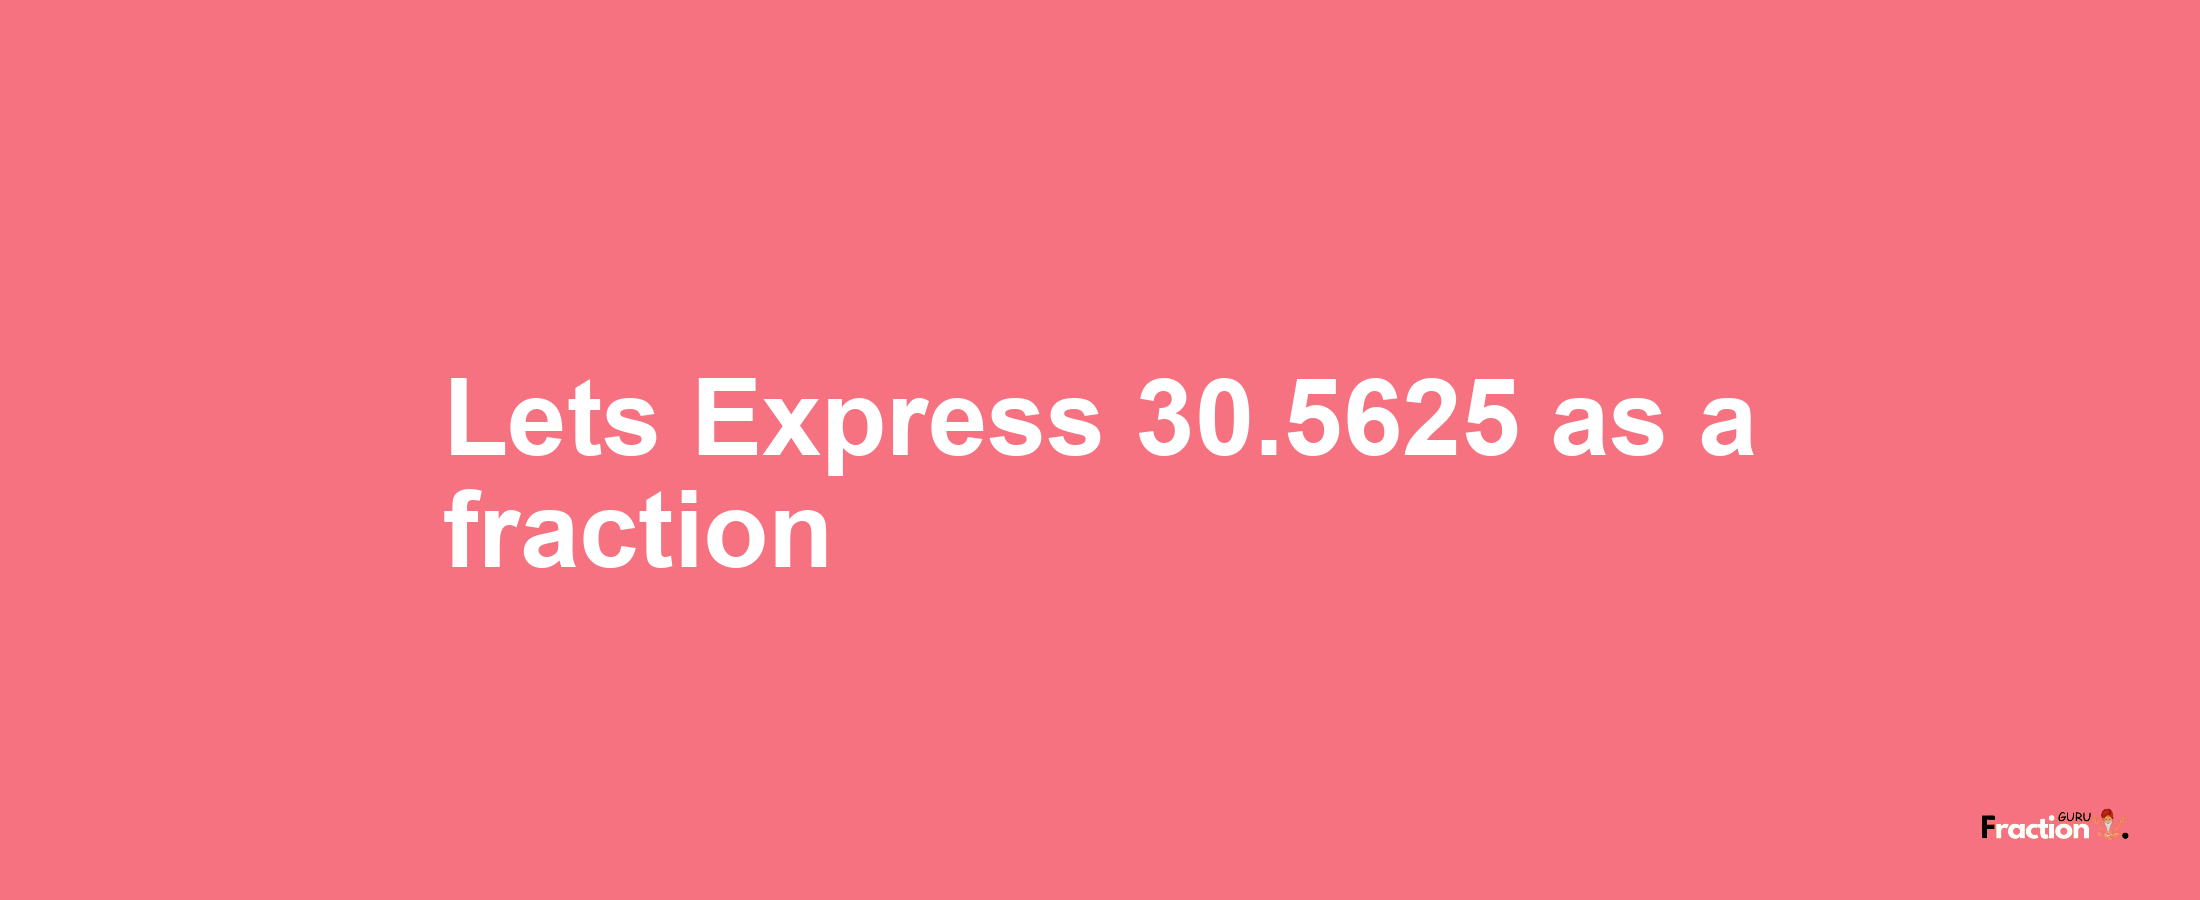 Lets Express 30.5625 as afraction